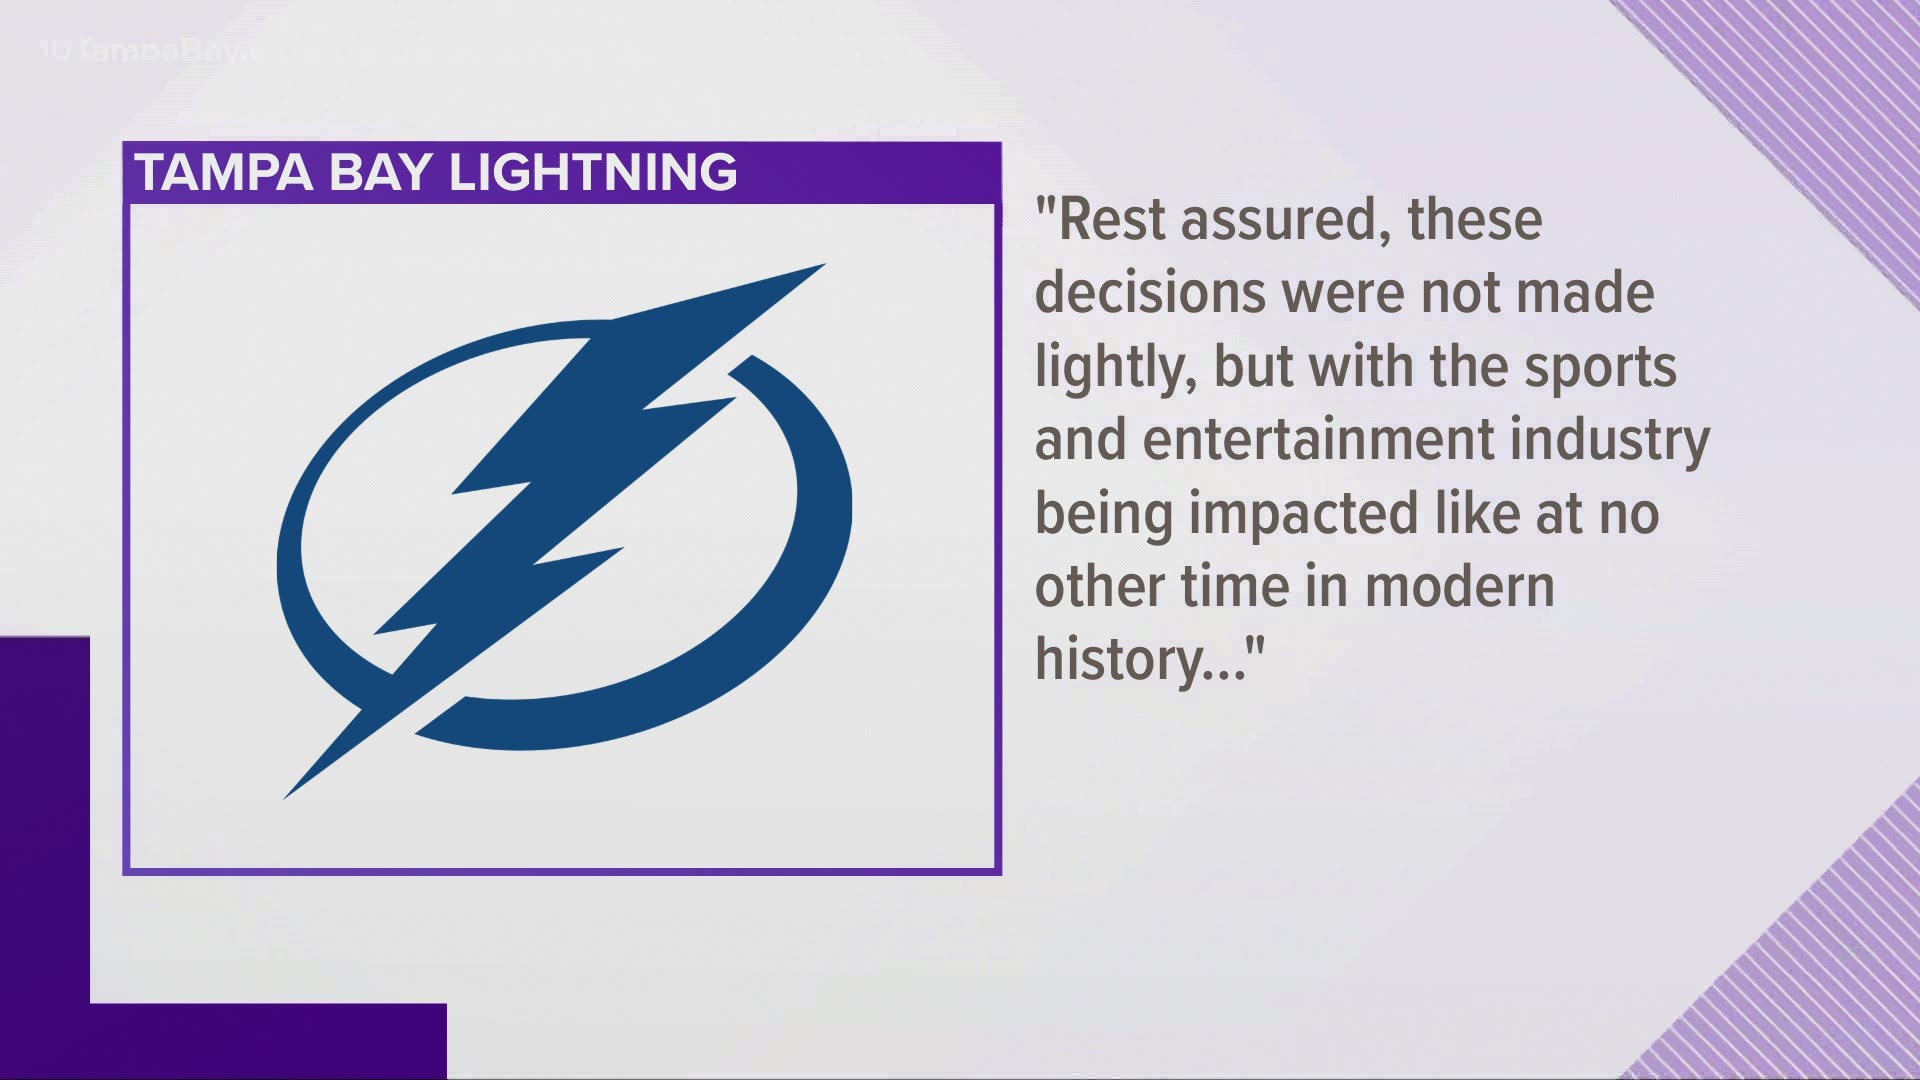 Just months after winning the Stanley Cup, officials with the Tampa Bay Lightning say they're eliminating 30 positions.